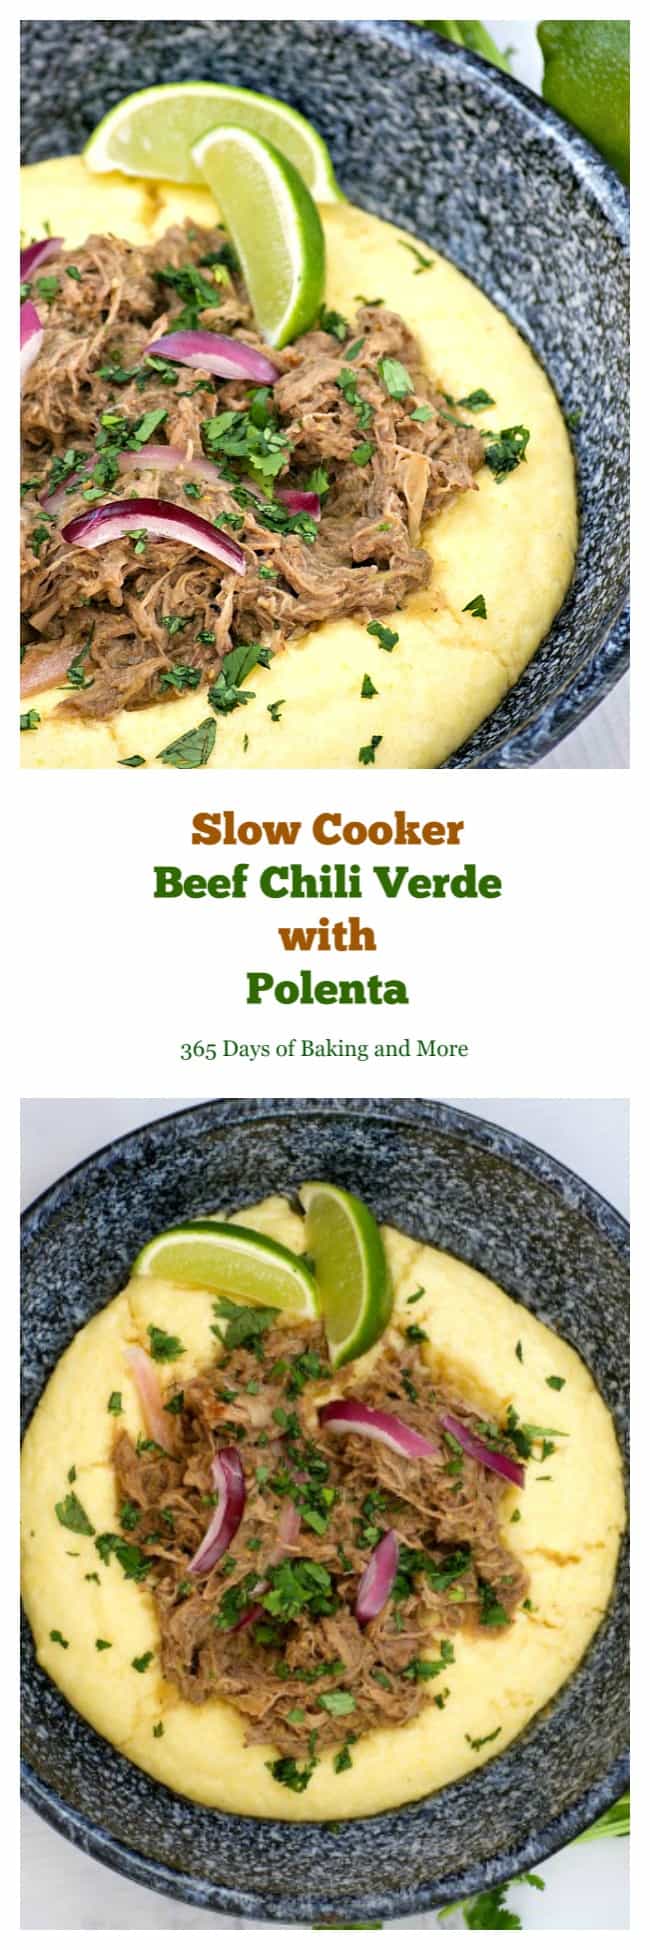 Slow Cooker Beef Chili Verde with Polenta are savory beef short ribs with salsa verde. Serve with polenta and you've got a super easy and delicious dinner.